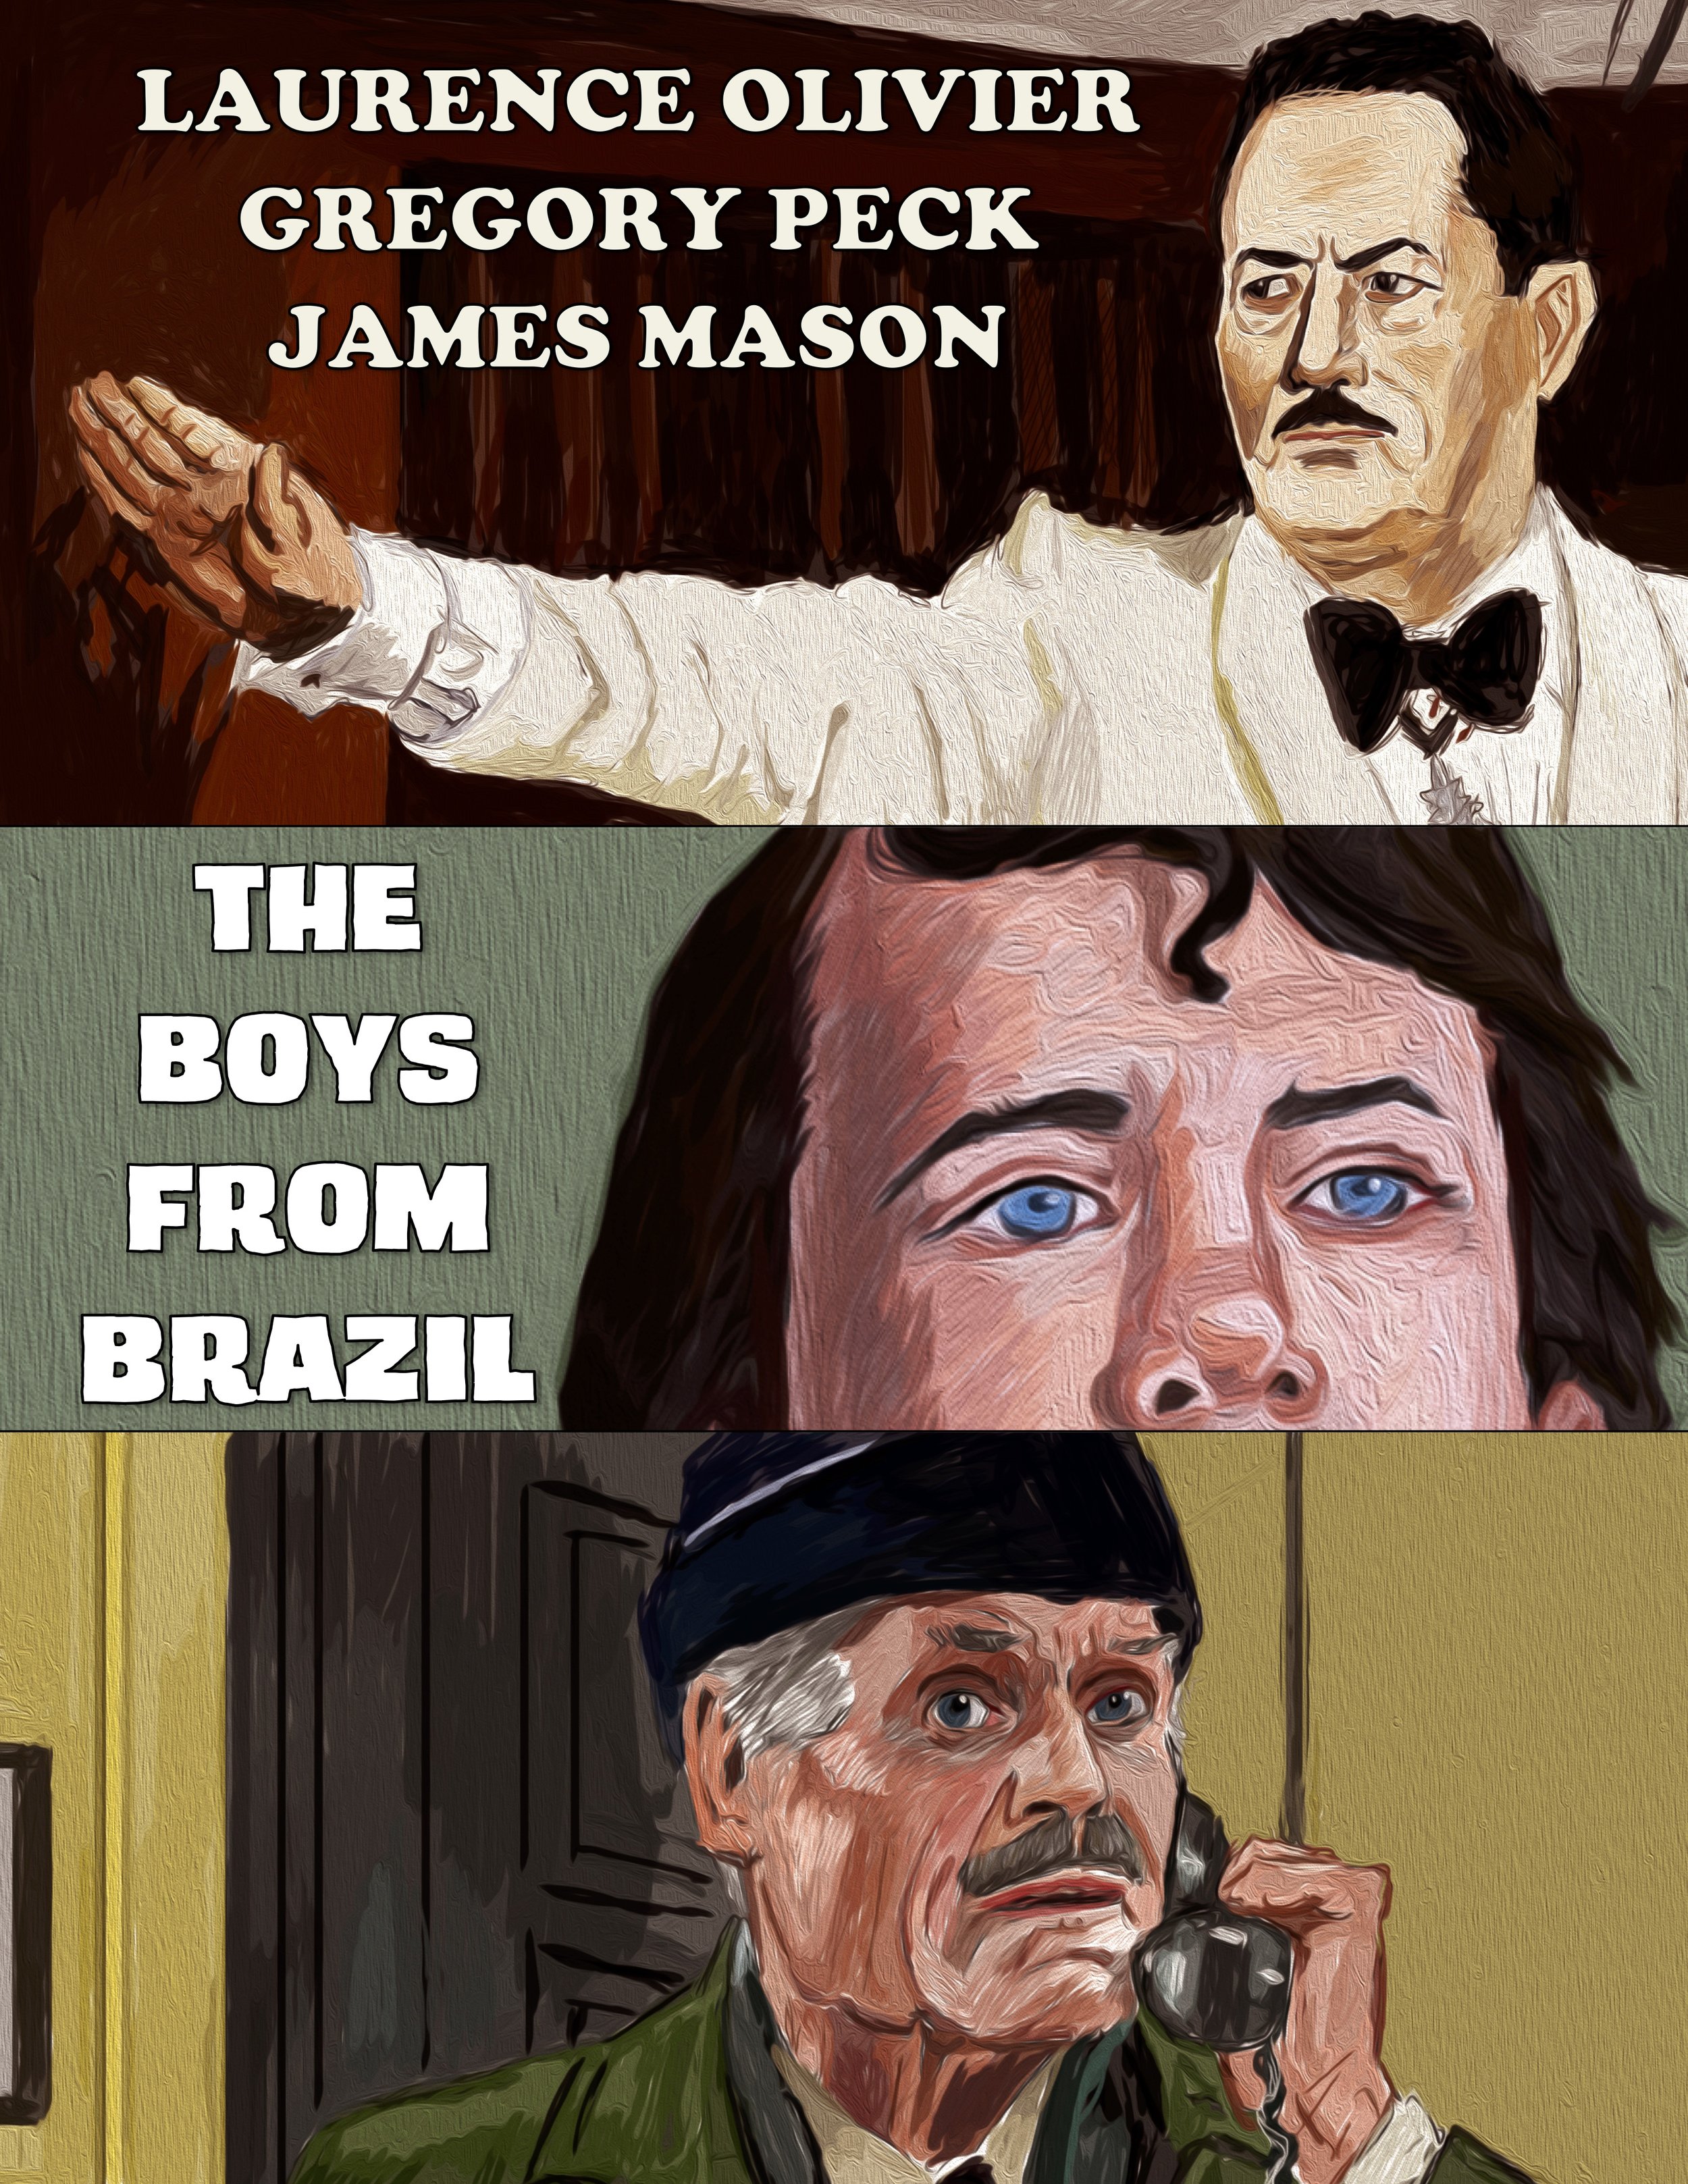 The Boys From Brazil (1978)